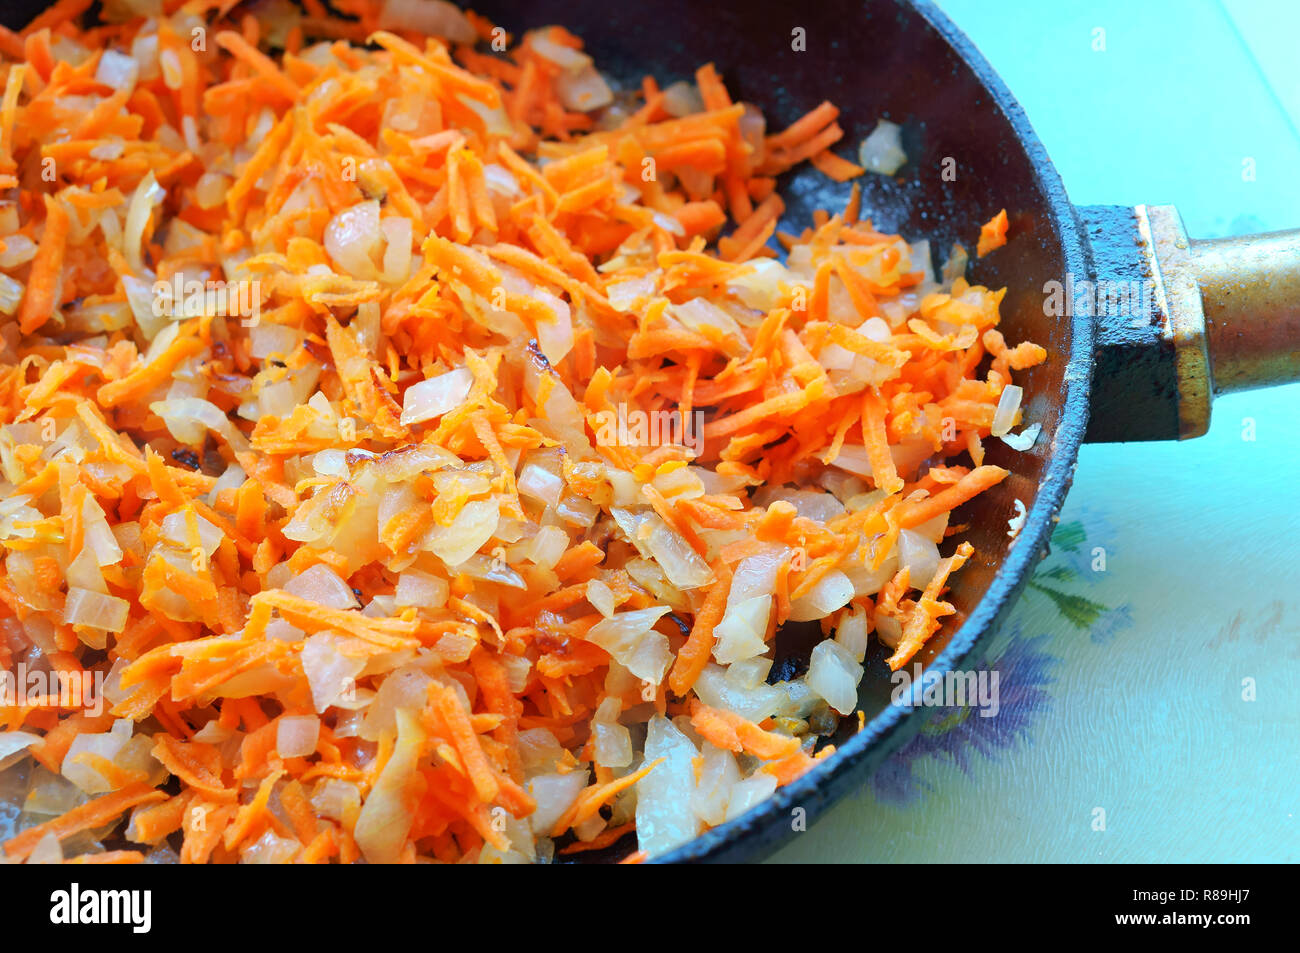 Roast Carrots With Onions In A Frying Pan Cook Dishes With Onions And Carrots Stock Photo Alamy,Weber Spirit E 310 Dimensions